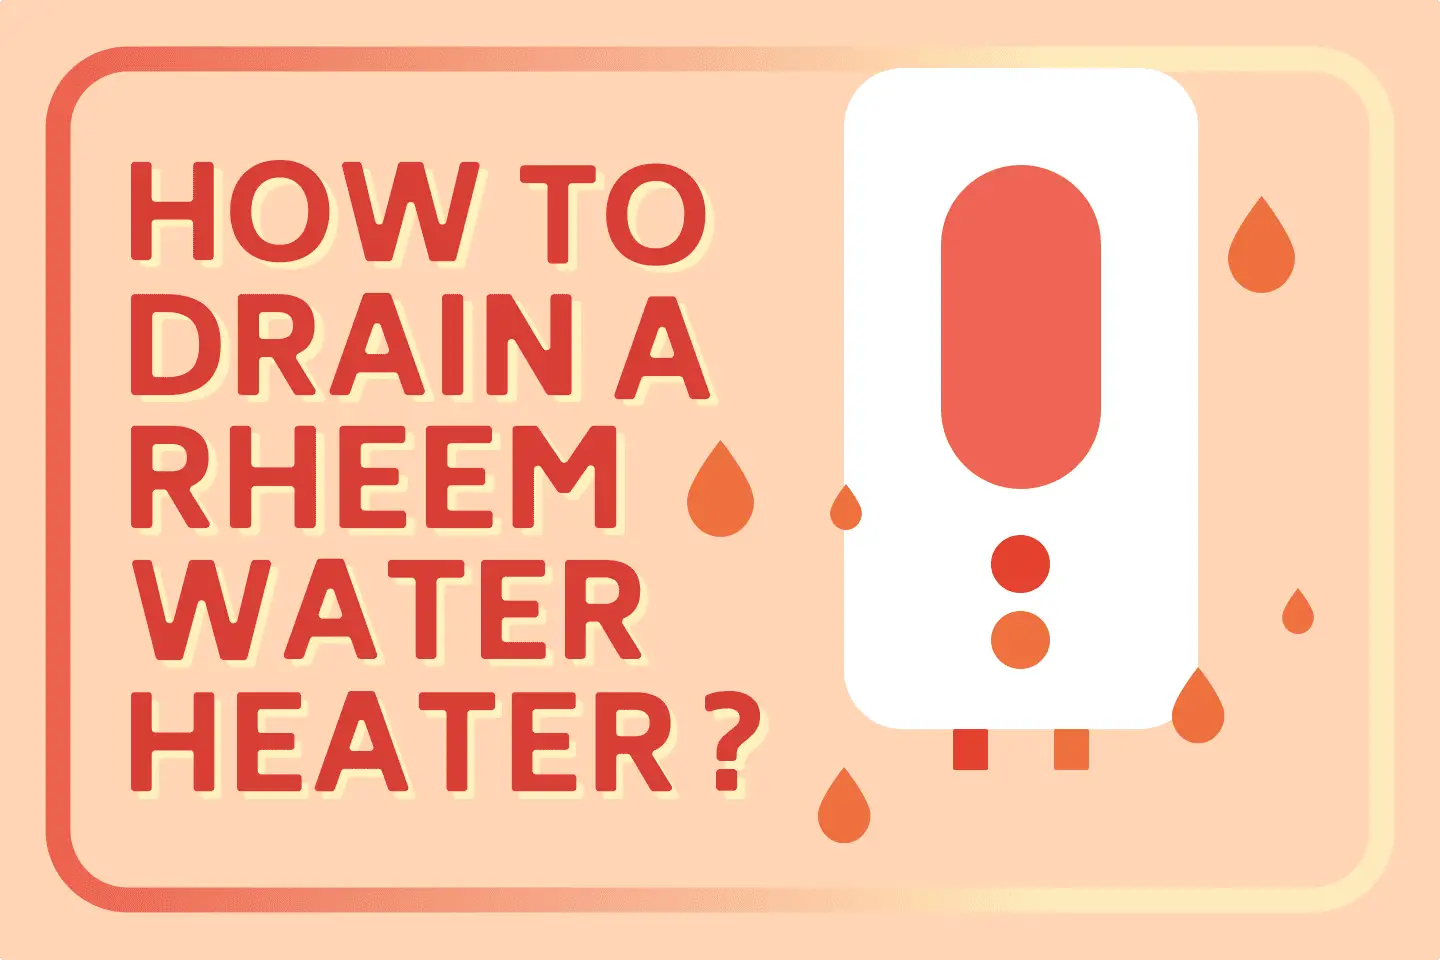 How To Drain A Rheem Water Heater [Step-by-Step Guide]